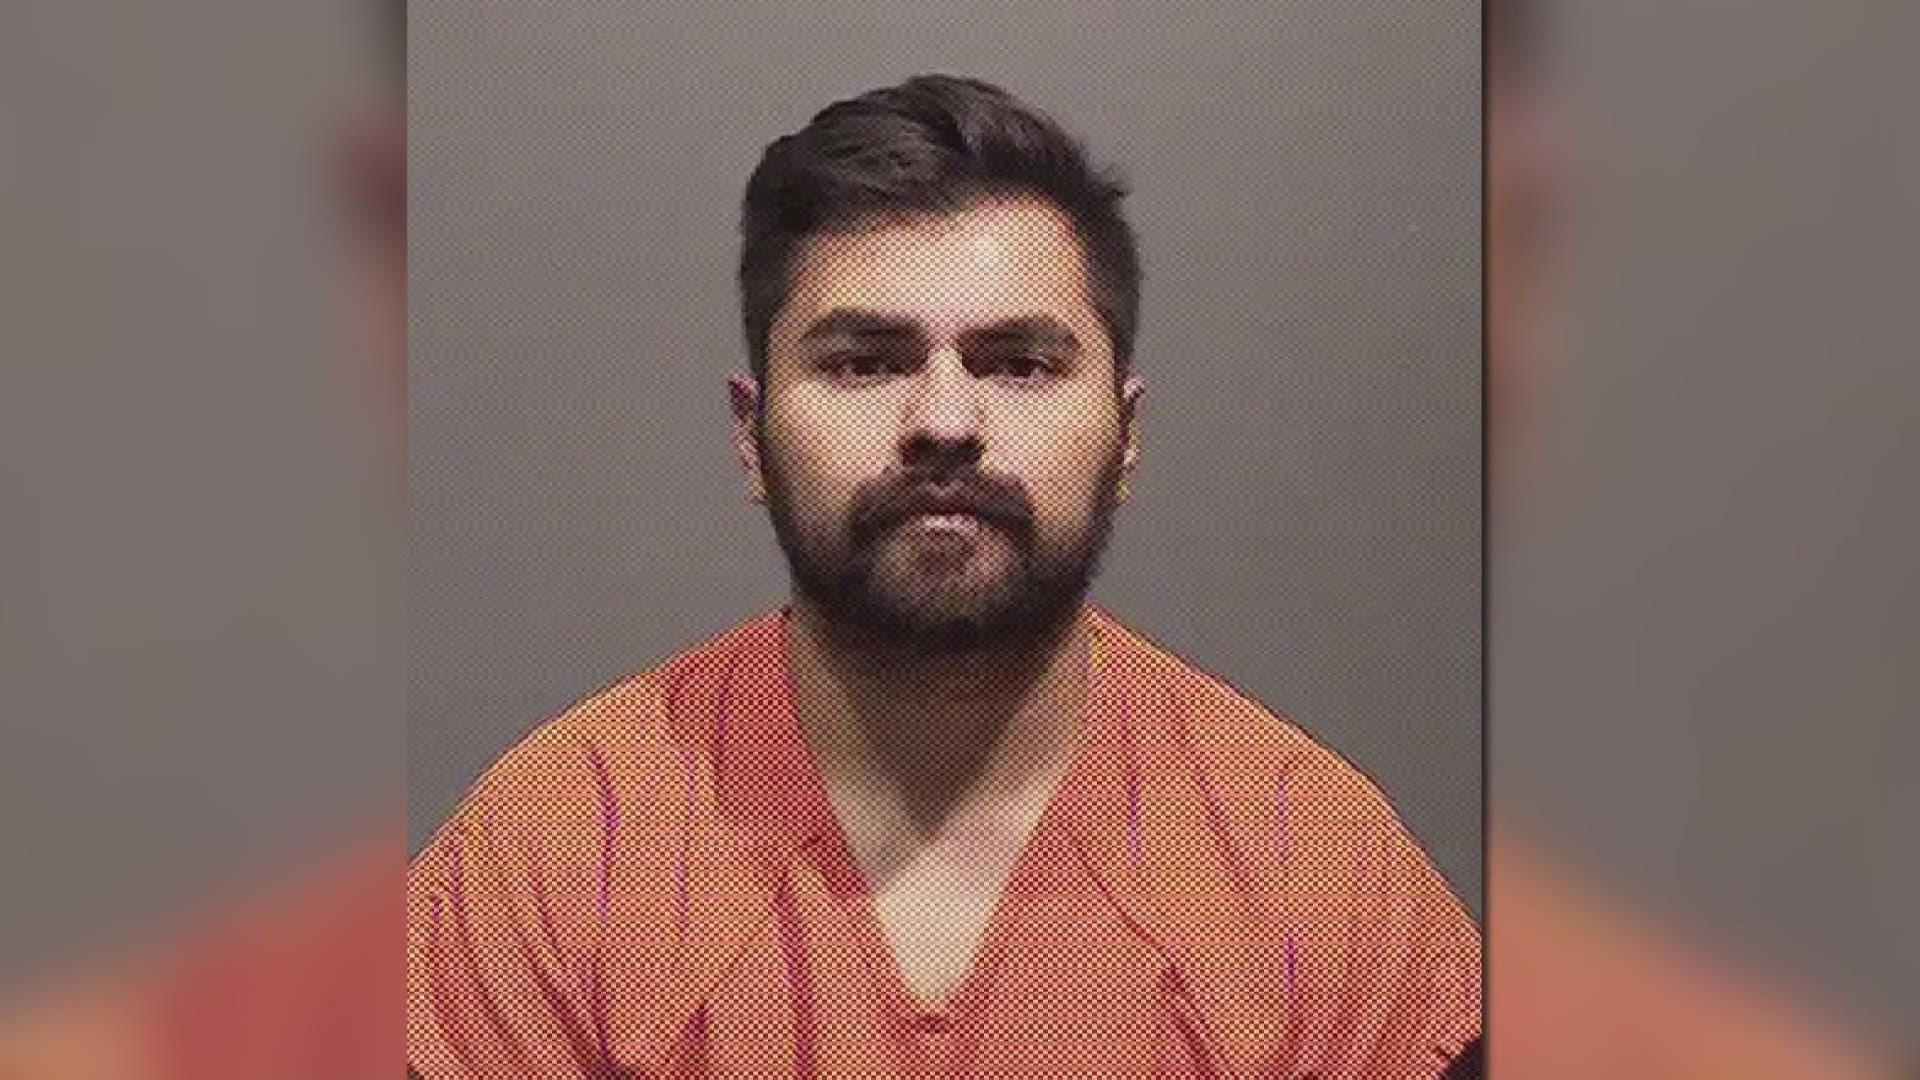 The Lakewood Police Department said Luis Robles–Luevanos, 27, was arrested Friday. He was put on administrative leave the day before, Jeffco Public Schools said.